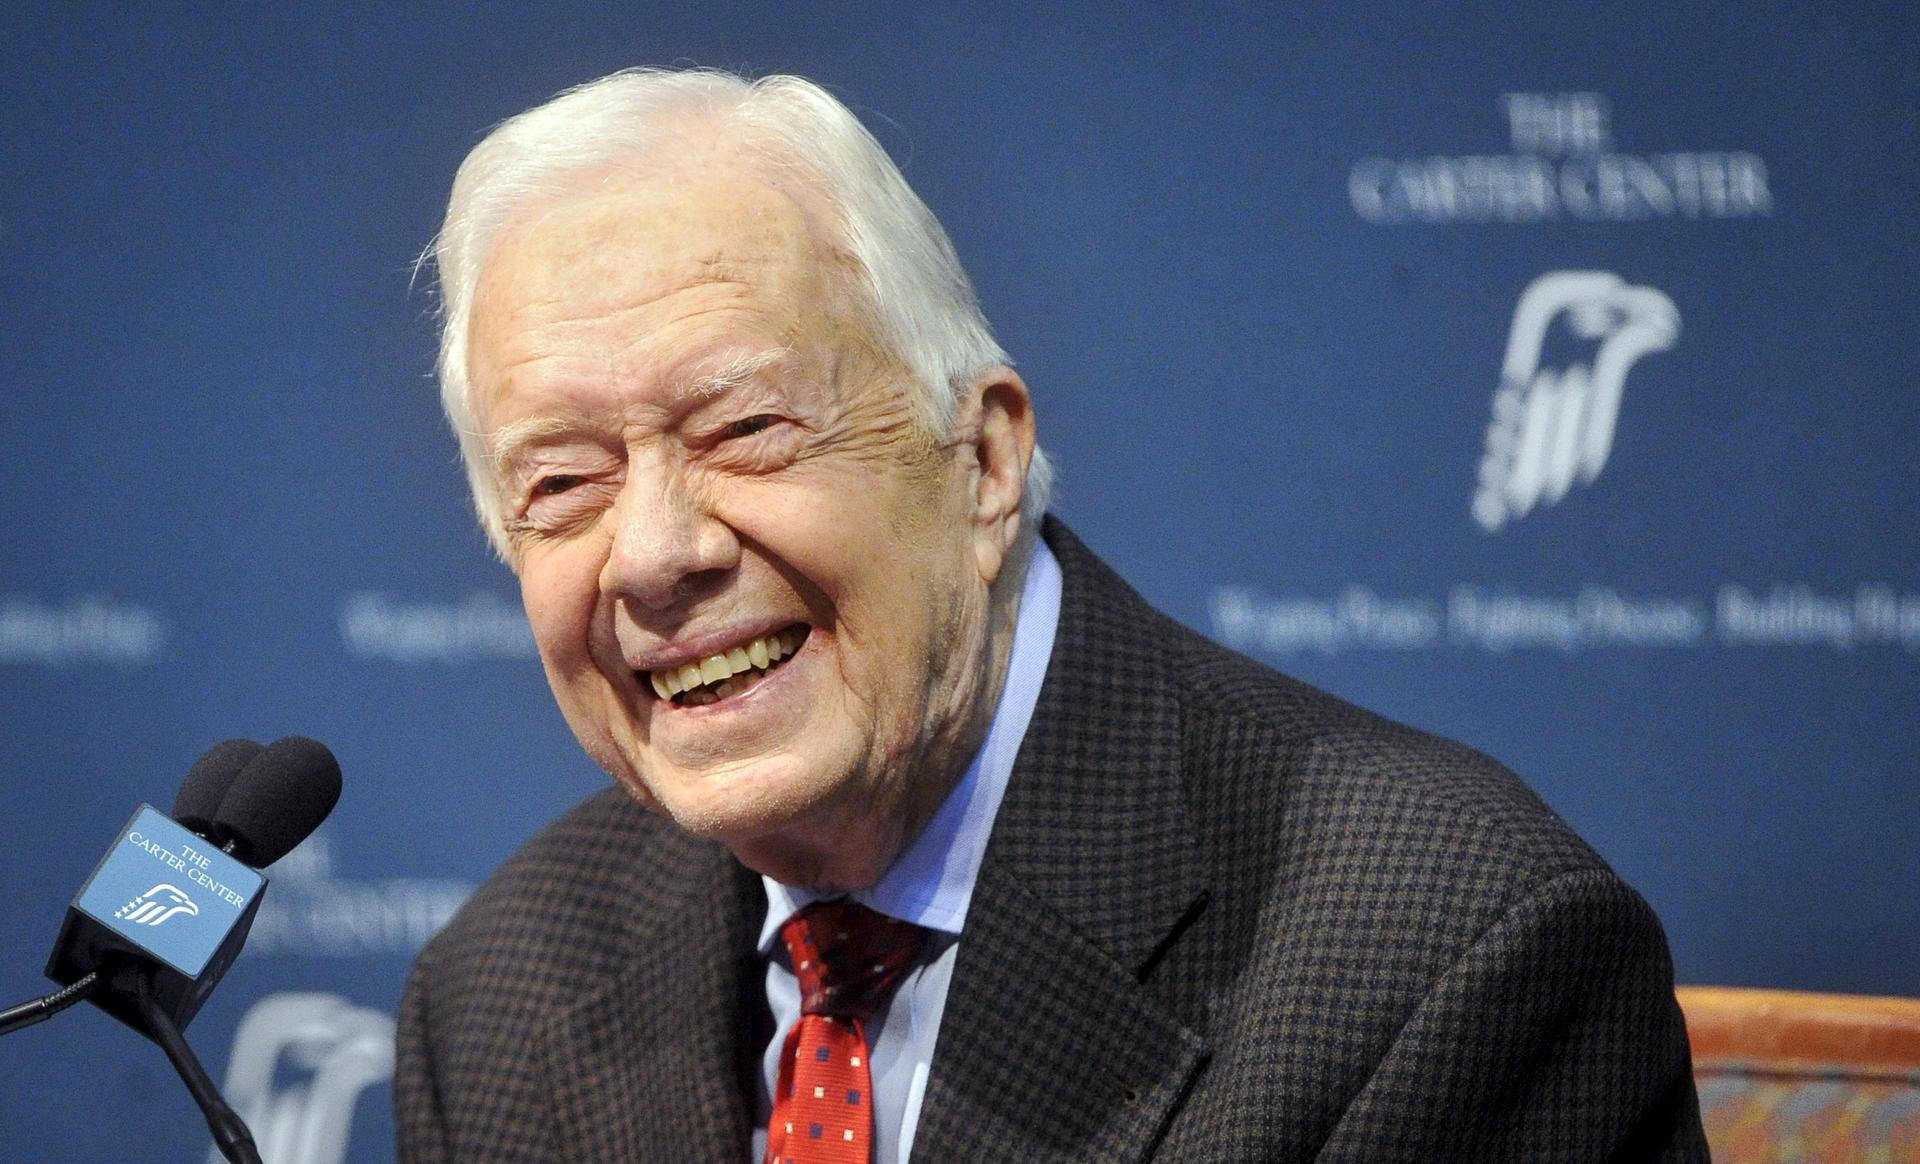 Former President Jimmy Carter takes questions from the media during a news conference about his recent cancer diagnosis and treatment plans, at the Carter Center in Atlanta. Carter, 90, said he will cut back dramatically on his schedule to receive treatme